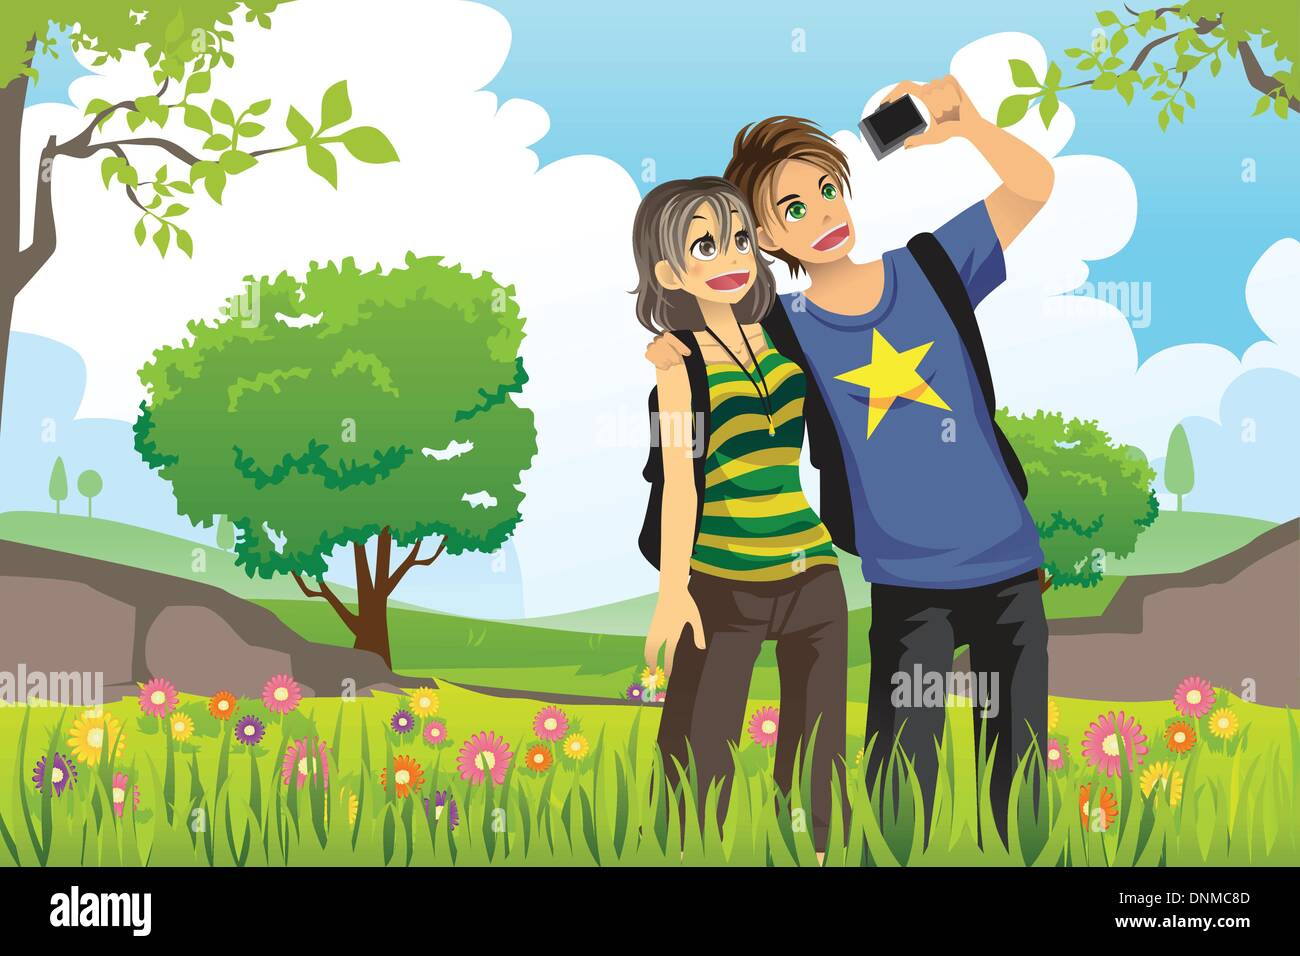 A vector illustration of a young tourist couple taking a picture of themselves Stock Vector